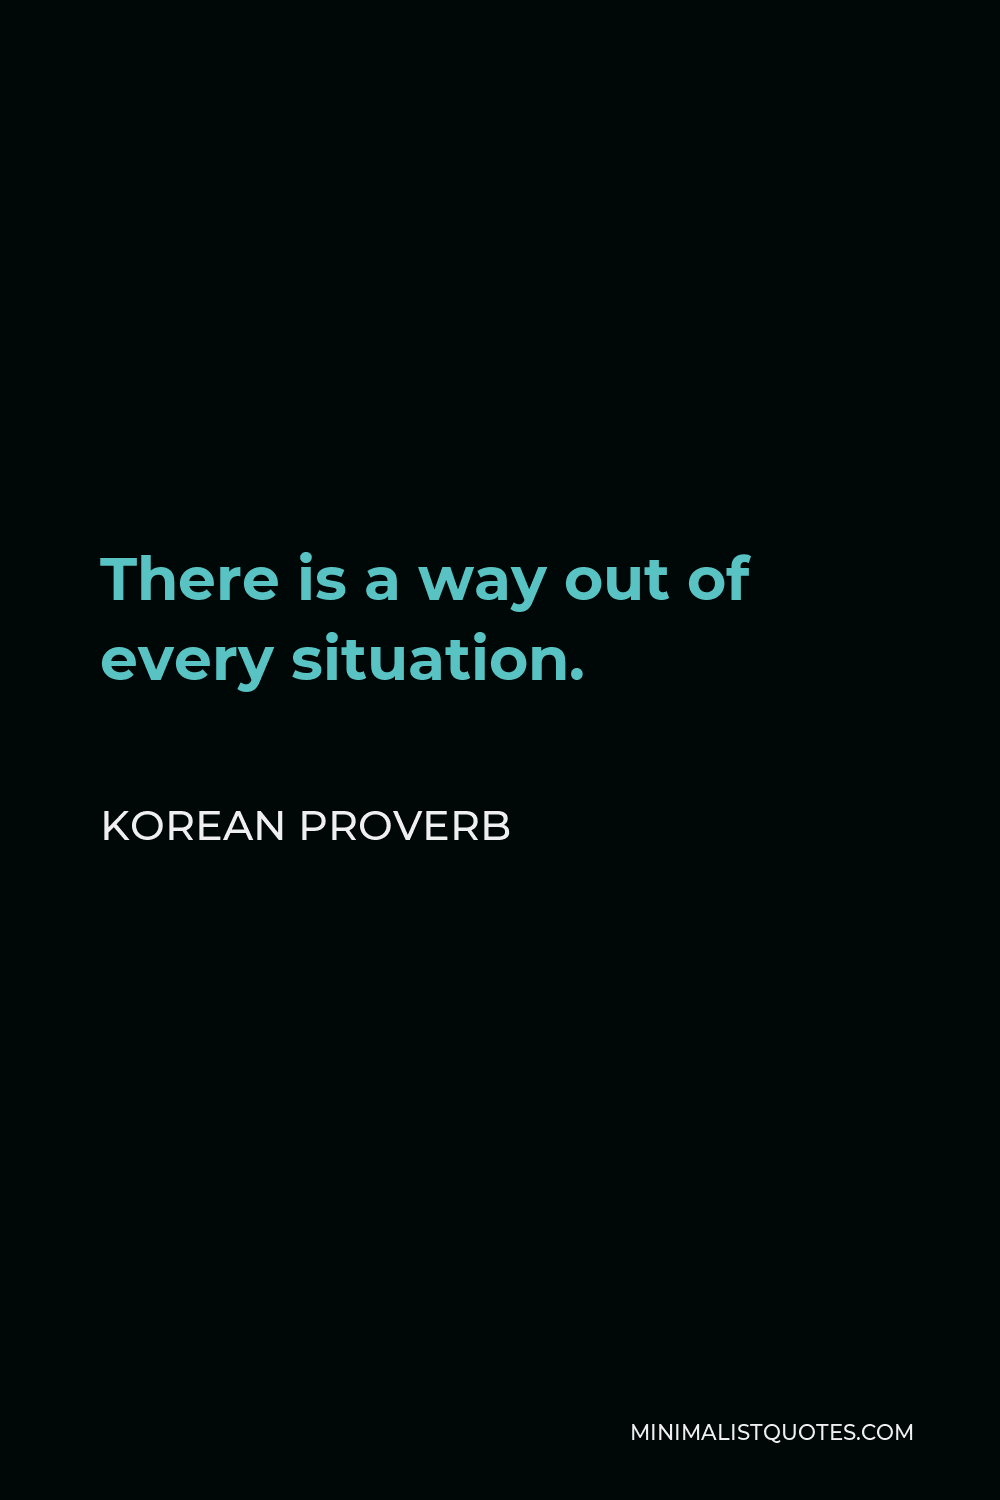 Korean Proverb Quote - There is a way out of every situation.